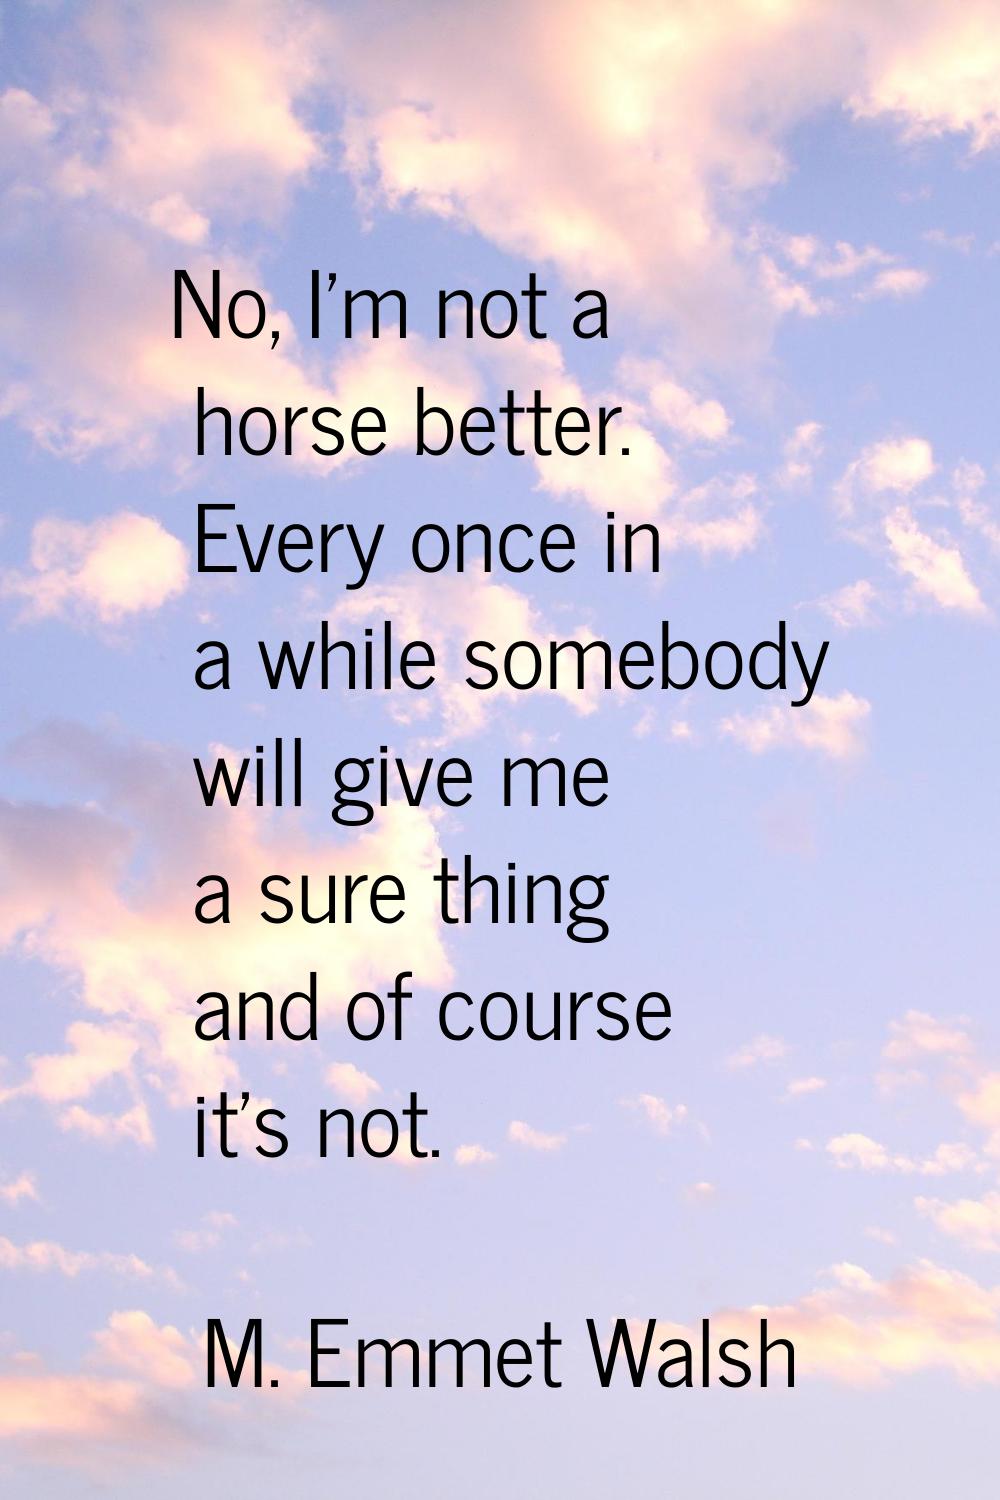 No, I'm not a horse better. Every once in a while somebody will give me a sure thing and of course 